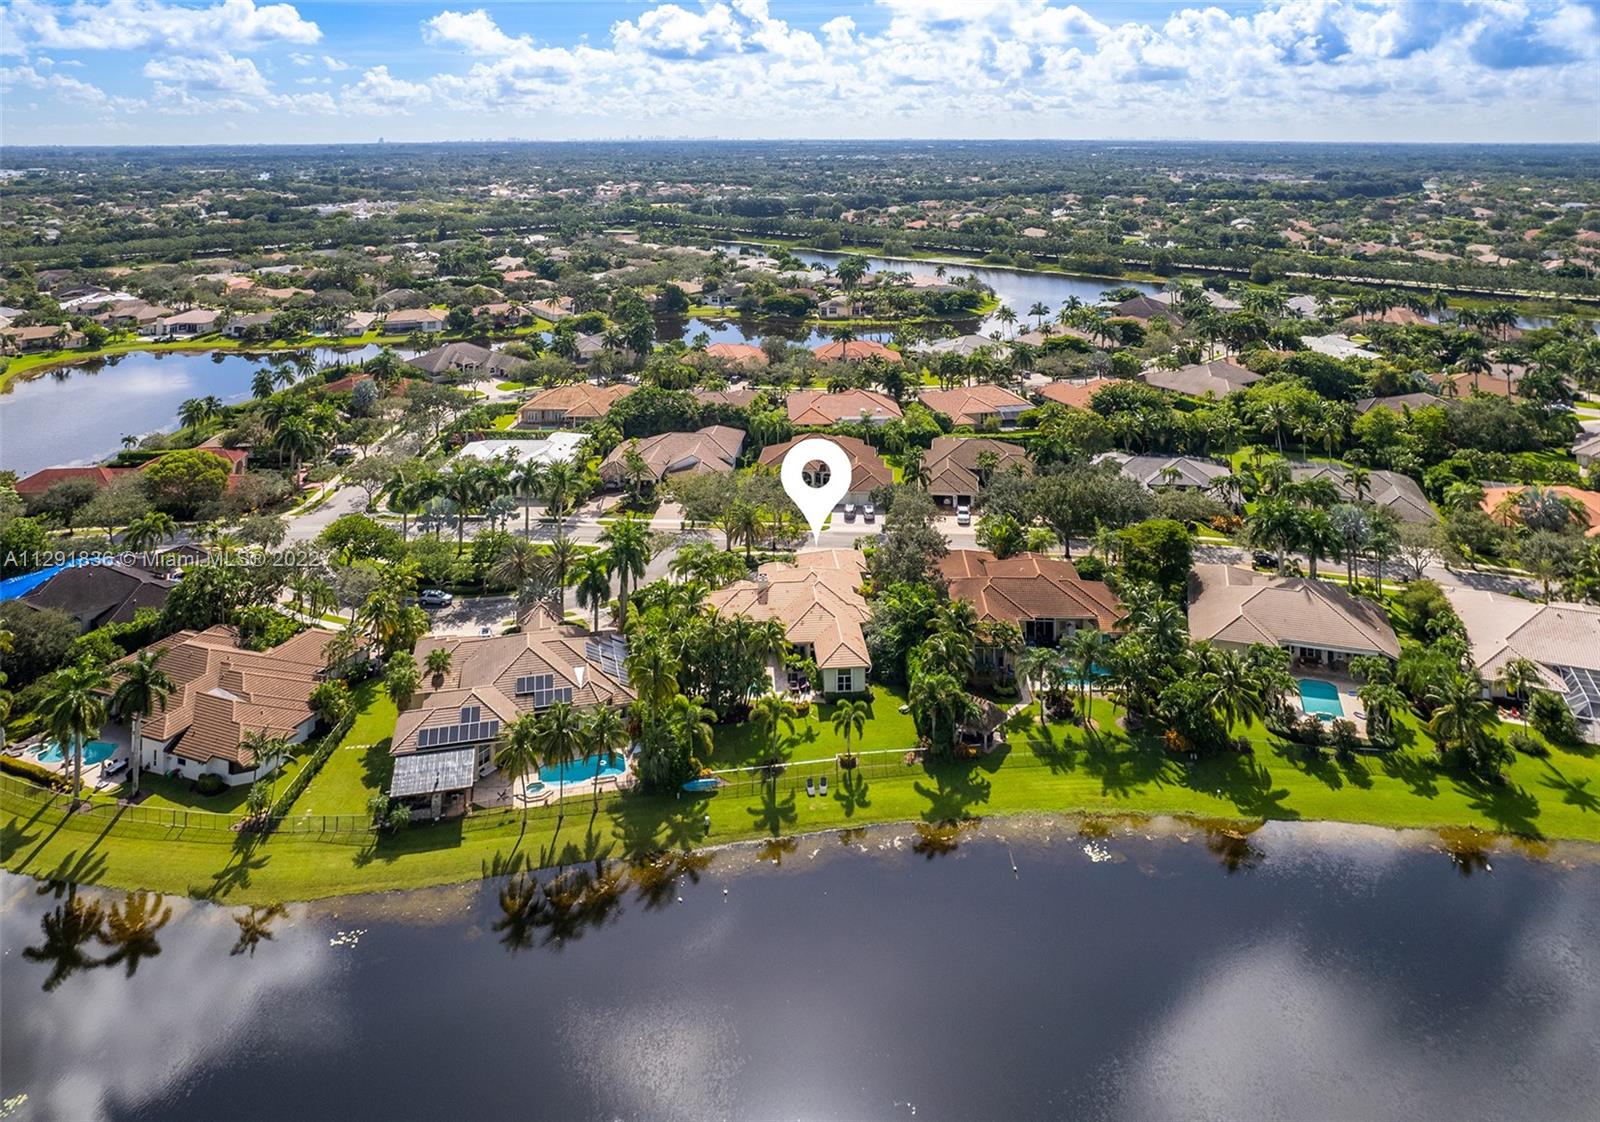 Exceptional Corner Waterfront Property located in the coveted community of The Landings in Weston. Impressive 23,174 sq.ft. lot the property offers sweeping water views. Recently remodeled the living spaces seamlessly connect to the thoughtfully conceived lush outdoor areas including the covered terrace and heated saltwater pool/spa with plenty of space for lounging in the sun. All-new systems (A/C’s, pool heater, appliances) and substantial upgrades ensure the home is comfortable year-round.  The home features 4BR/4.5BA+Custom Office/Library, Large Den, Formal Dining room & 3-car garage. Entertainer’s kitchen, volume coffered ceilings, wet bar, wood burning fireplace and light filled interior are among the many modern conveniences to be enjoyed and perfect for the discerning Buyer.